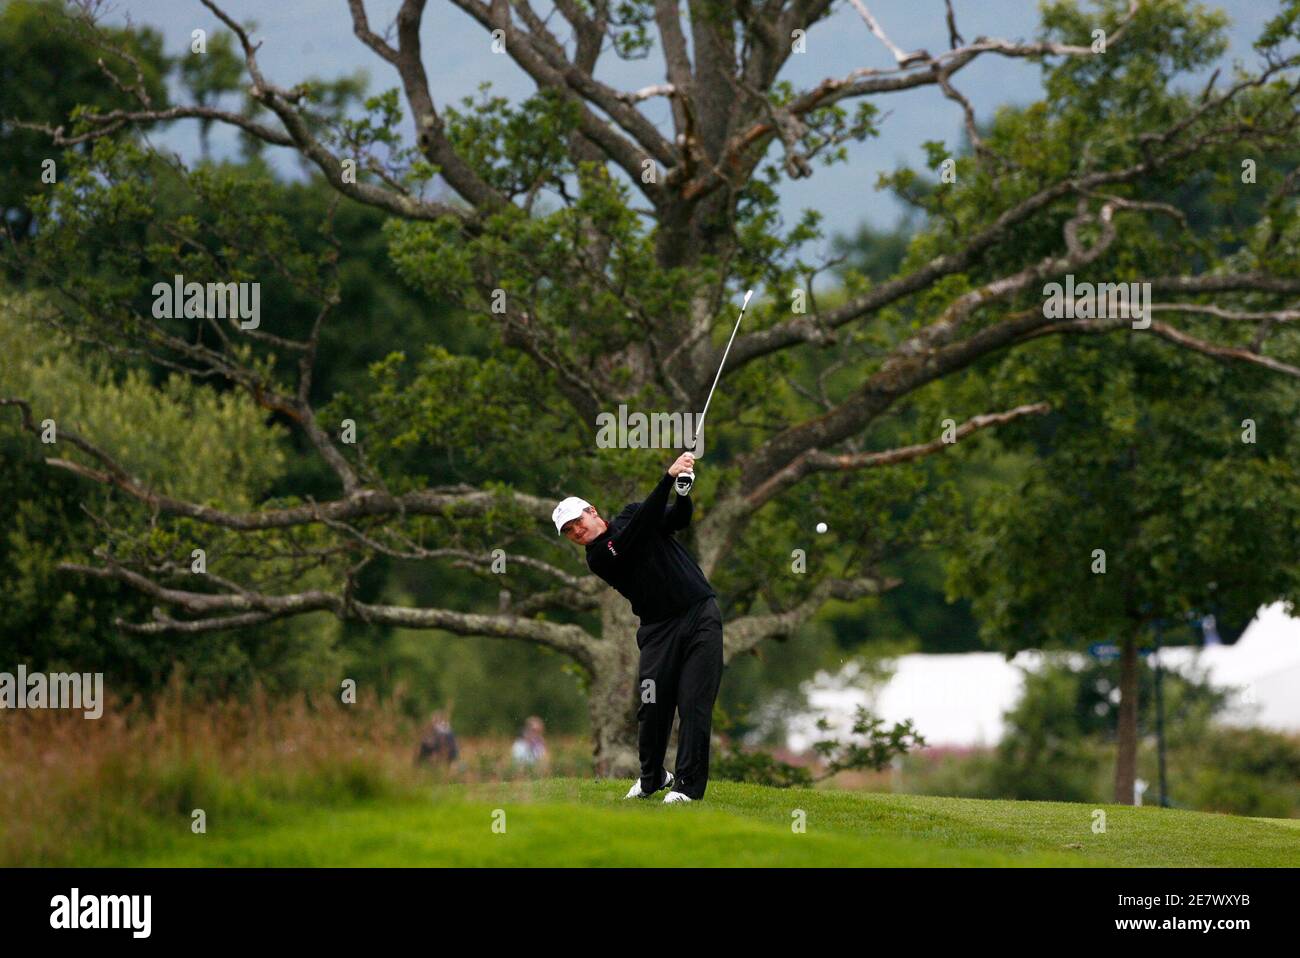 Scotland's Paul Lawrie plays his second shot at the second hole during his second round of the Scottish Open golf tournament at Loch Lommond near Glasgow, Scotland, July 11, 2008. REUTERS/David Moir (BRITAIN) Stock Photo